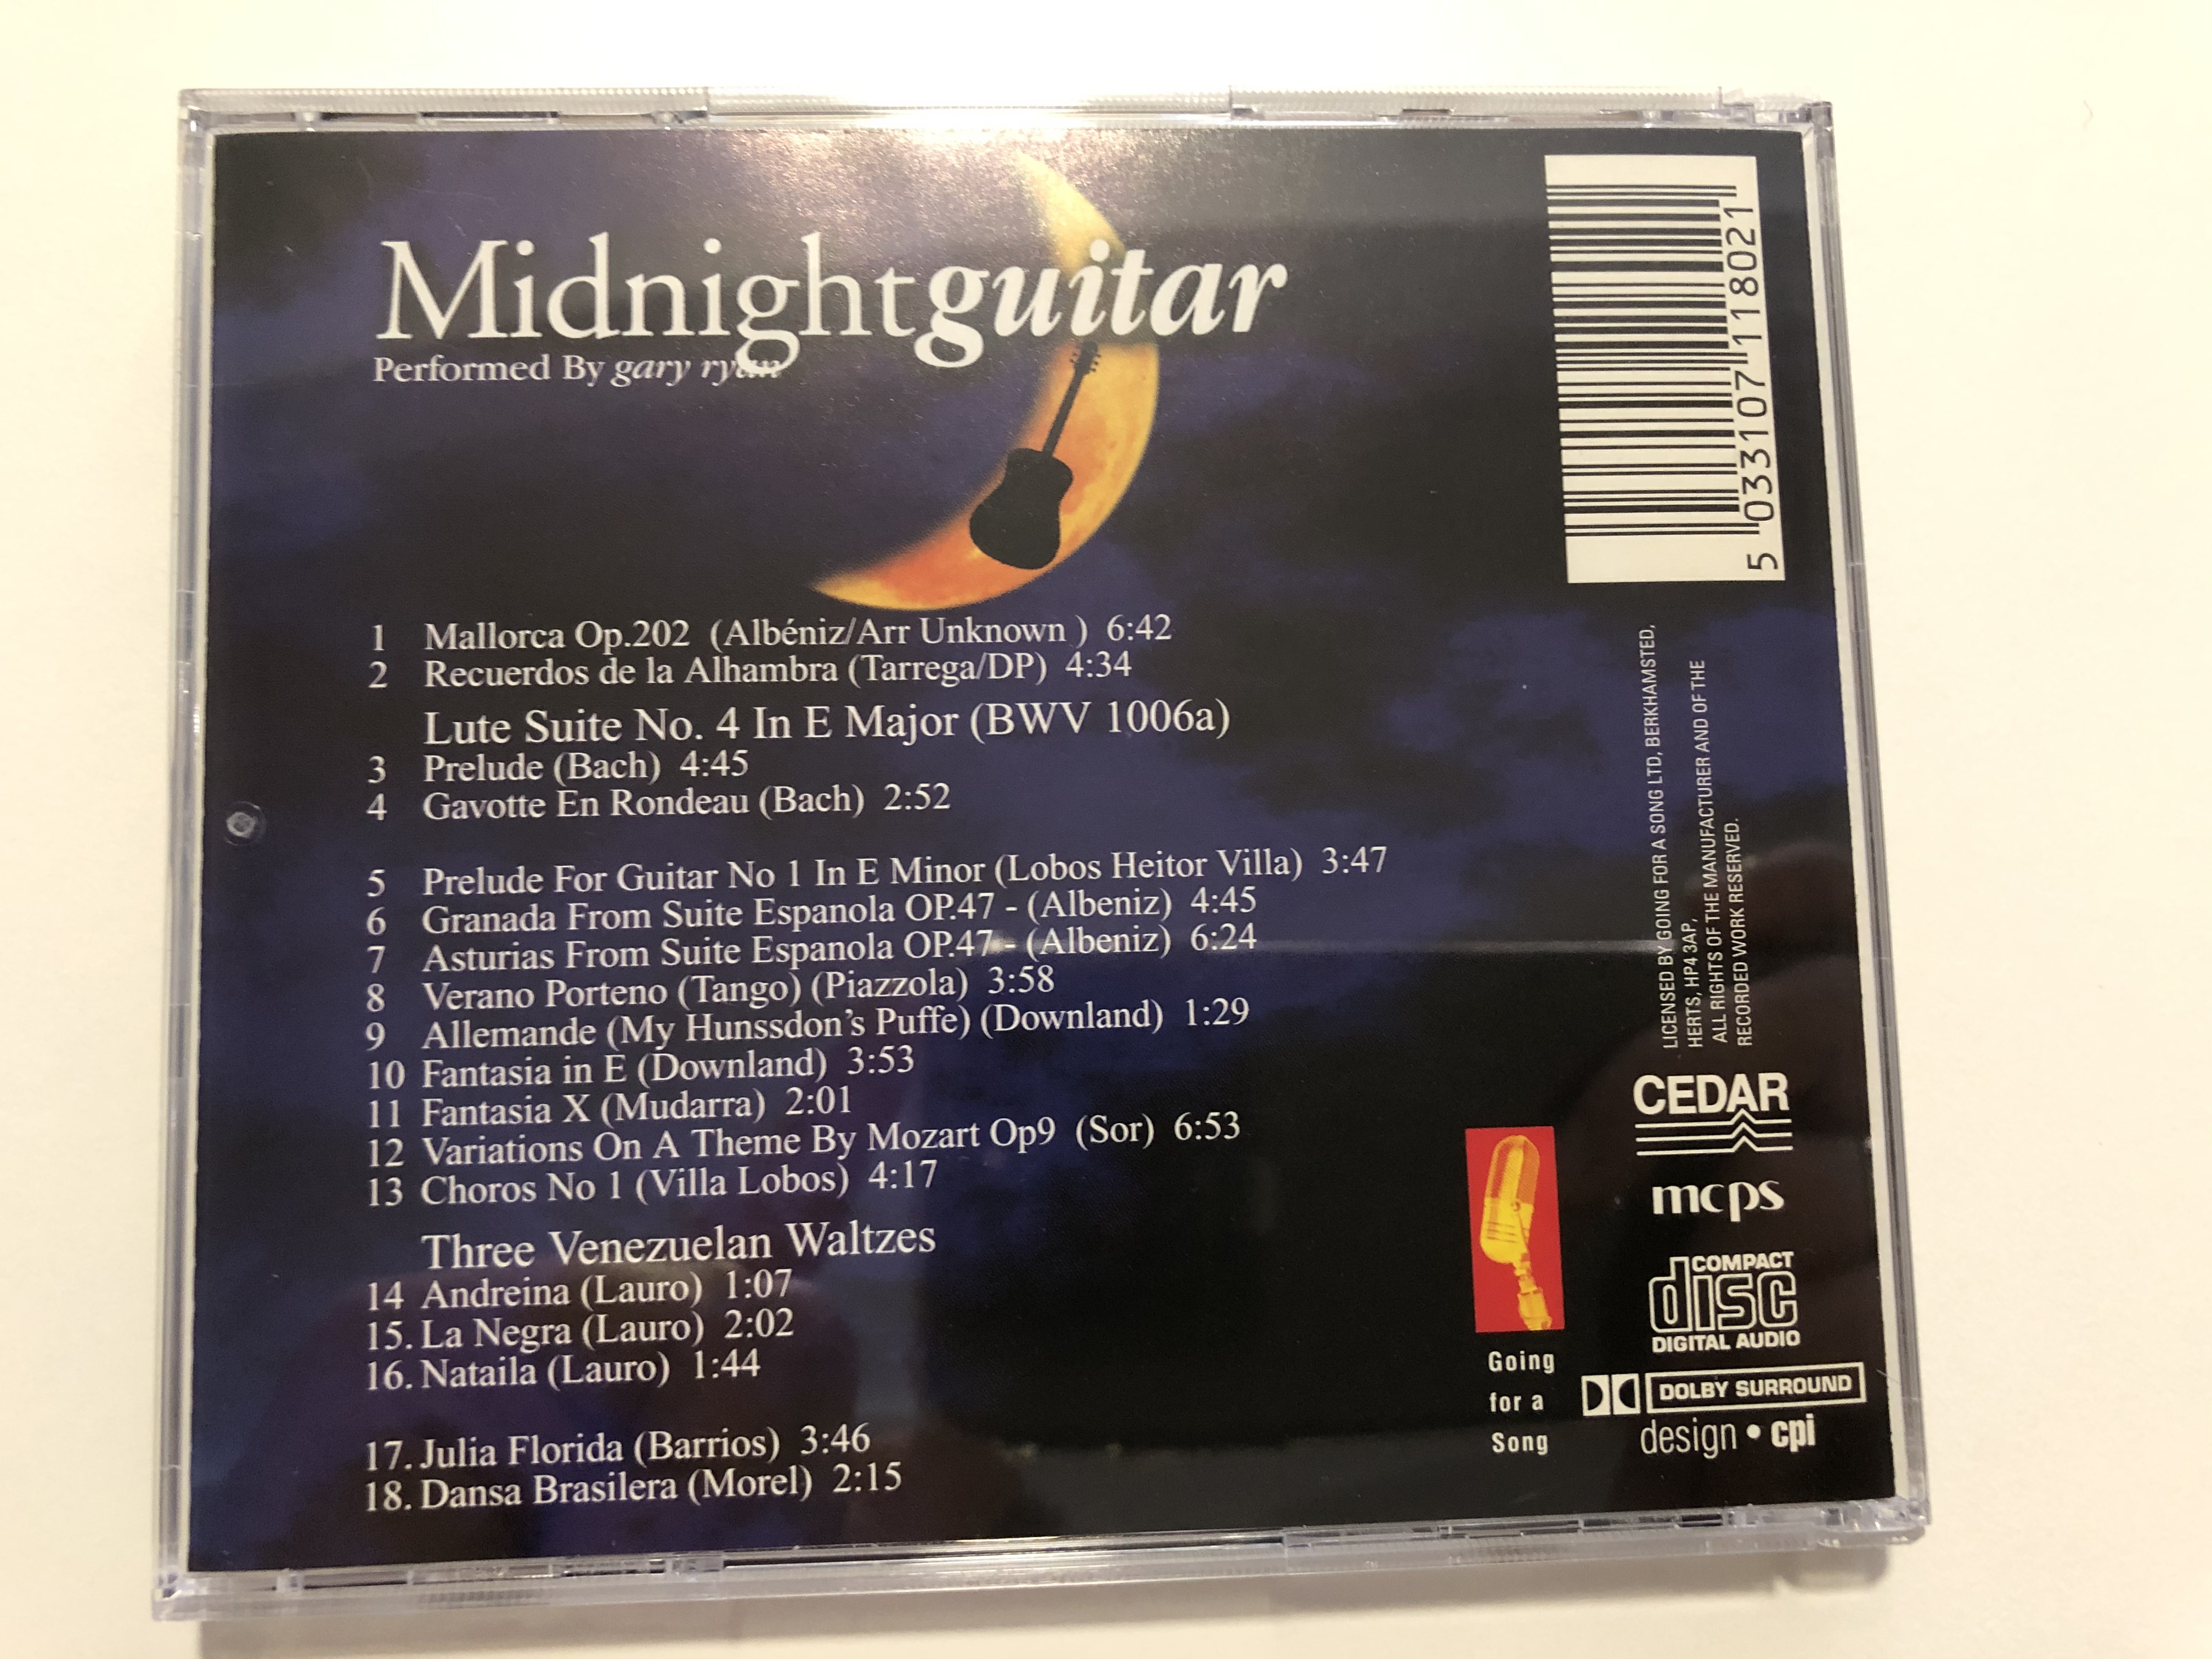 midnight-guitar-performed-by-gary-ryan-18-classical-tracks-going-for-a-song-audio-cd-gfs-180-2-.jpg